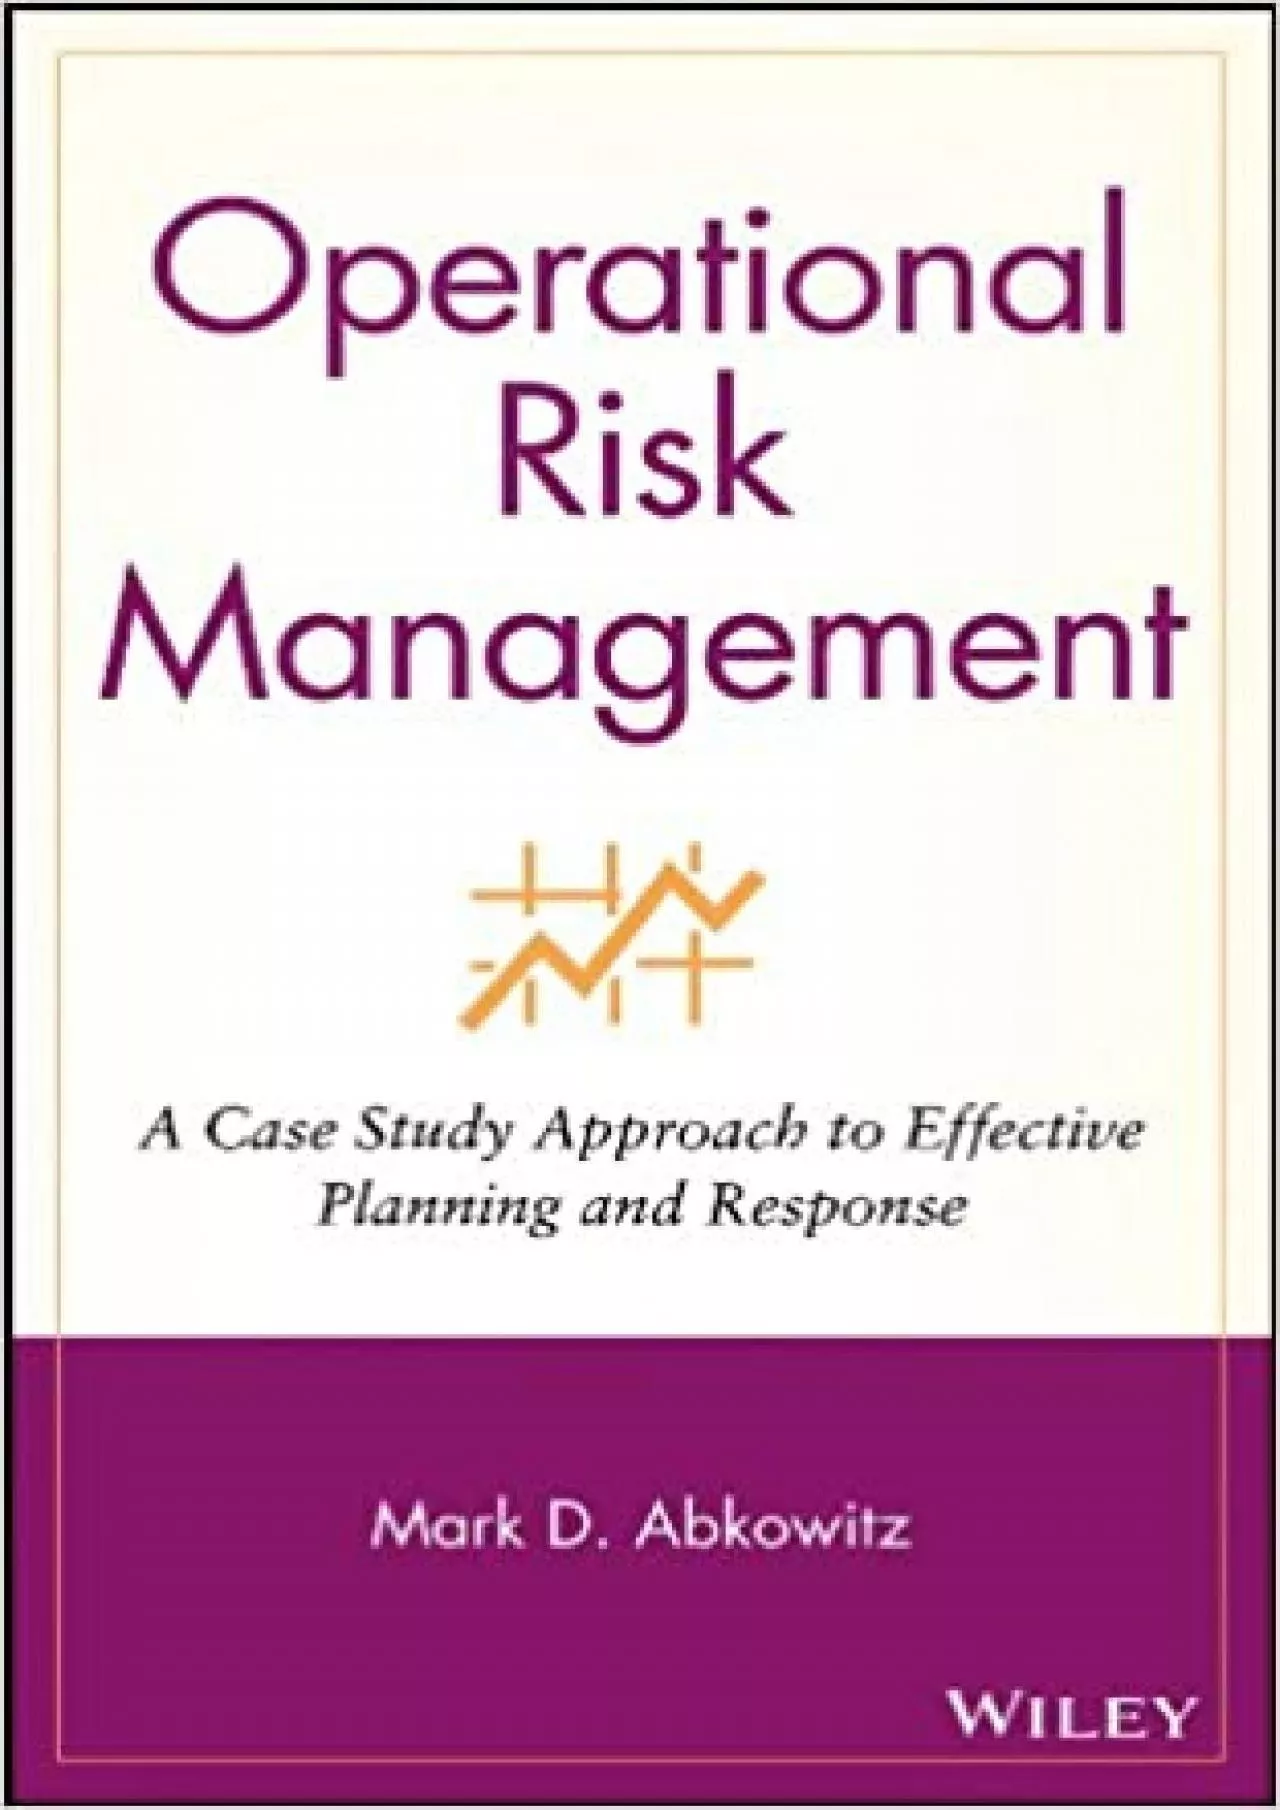 Operational Risk Management: A Case Study Approach to Effective Planning and Response